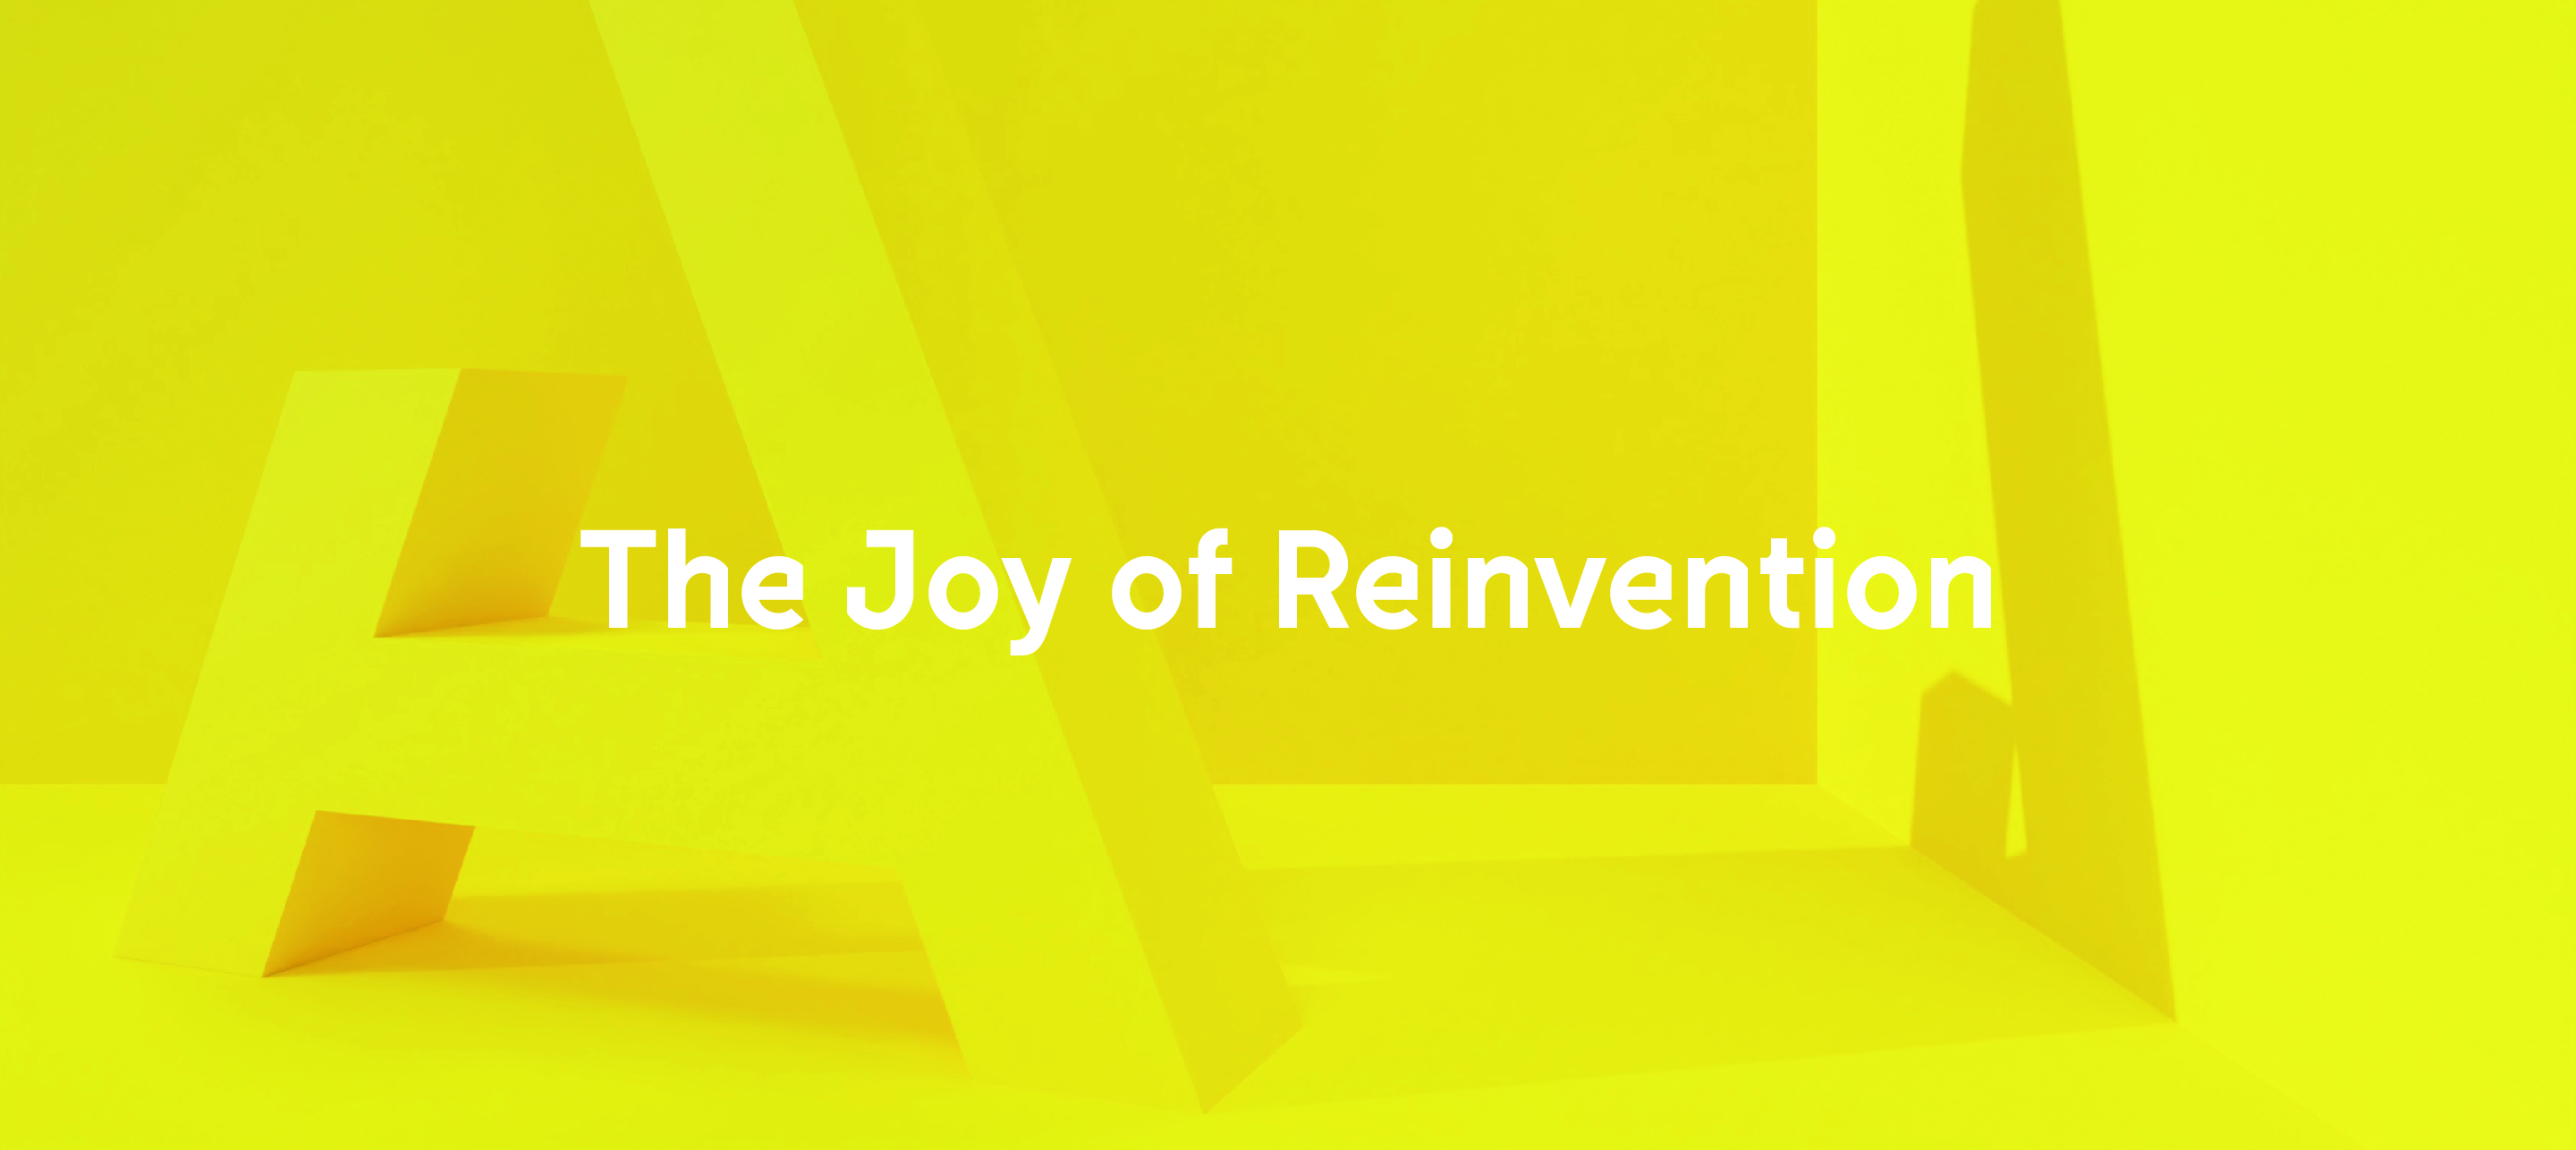 The Joy of Reinvention